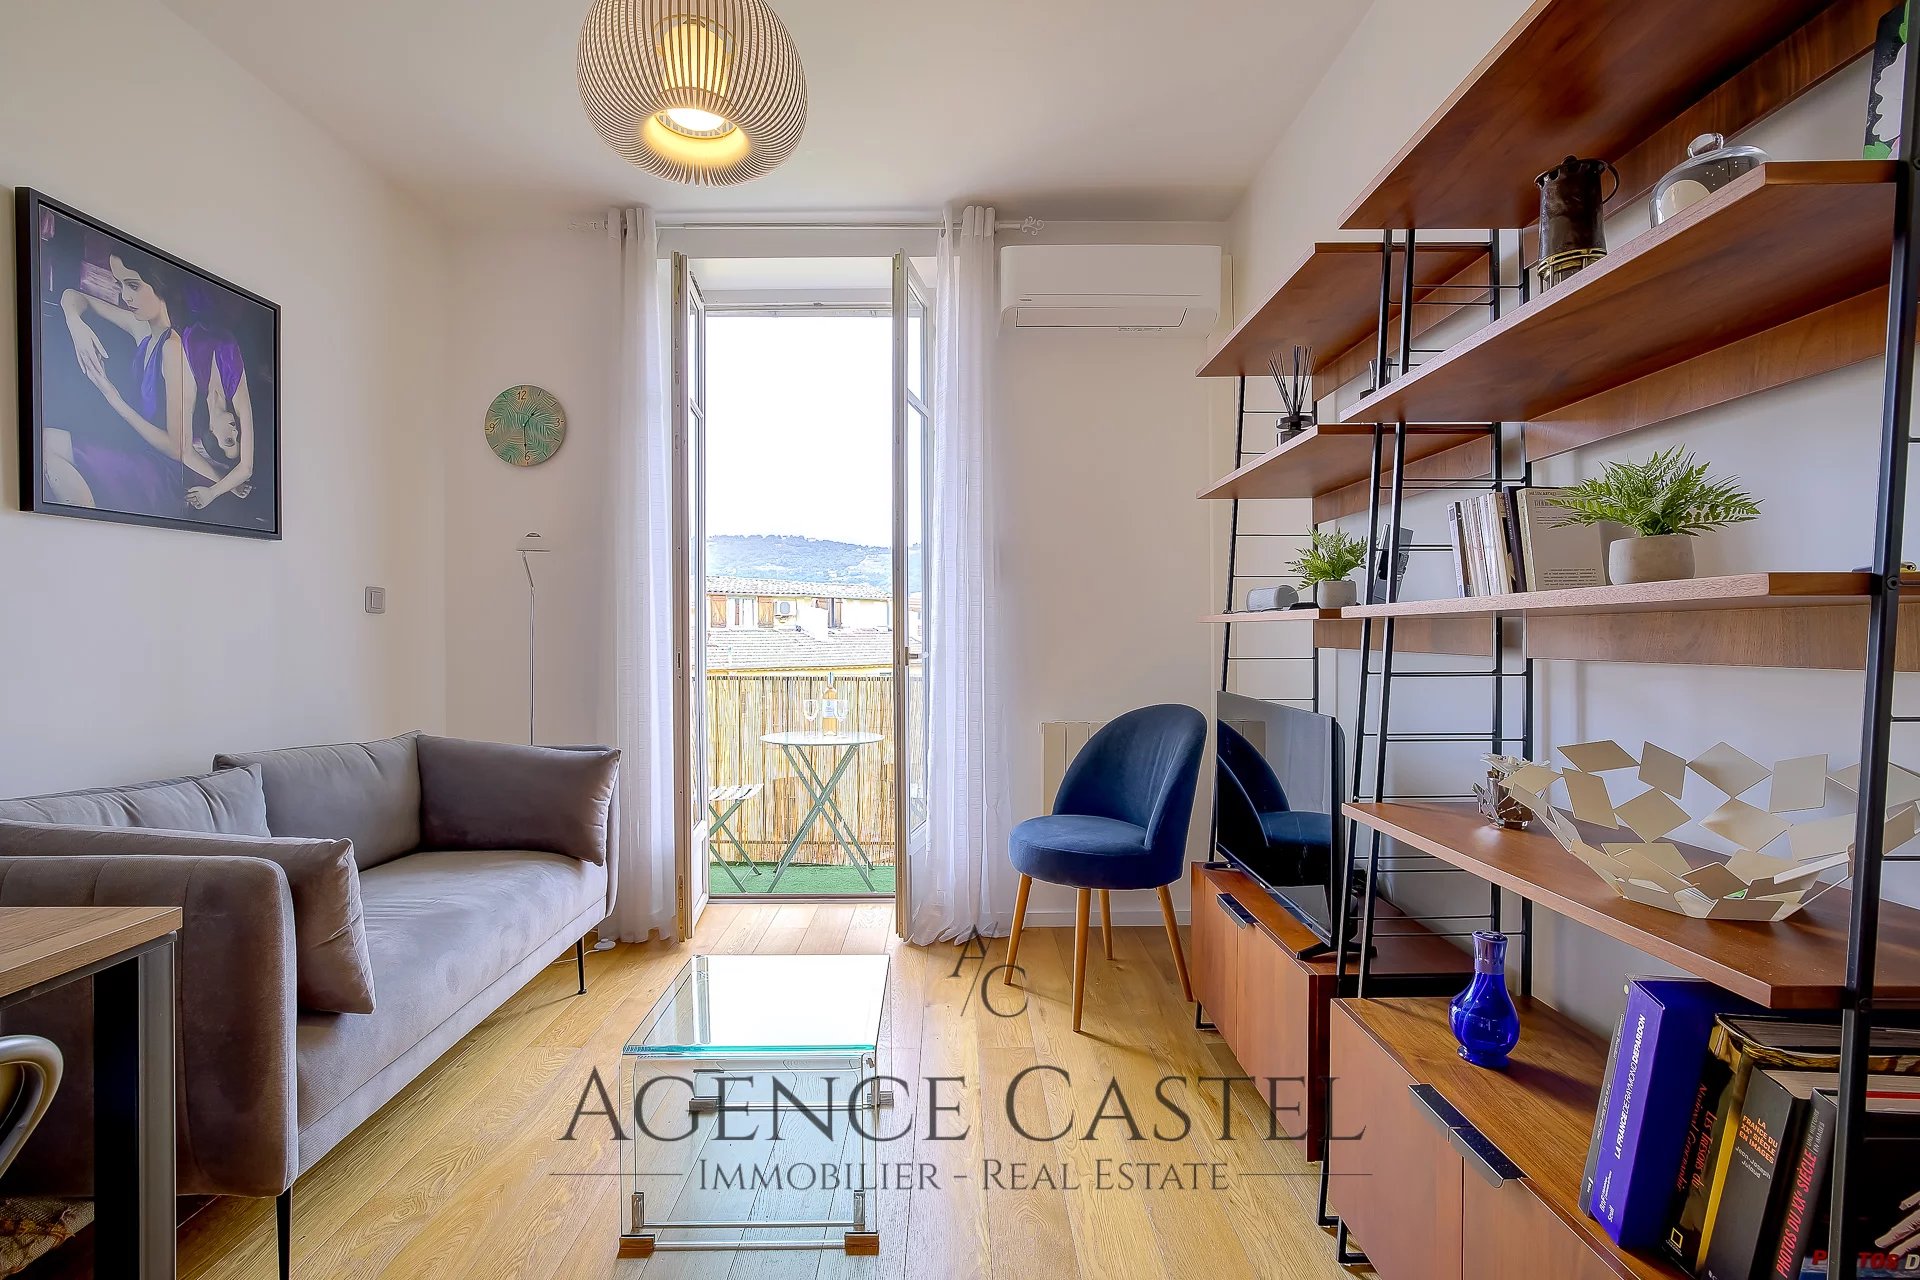 NICE PORT AREA - SUPERB ONE BEDROOM APARTMENT WITH BALCONY